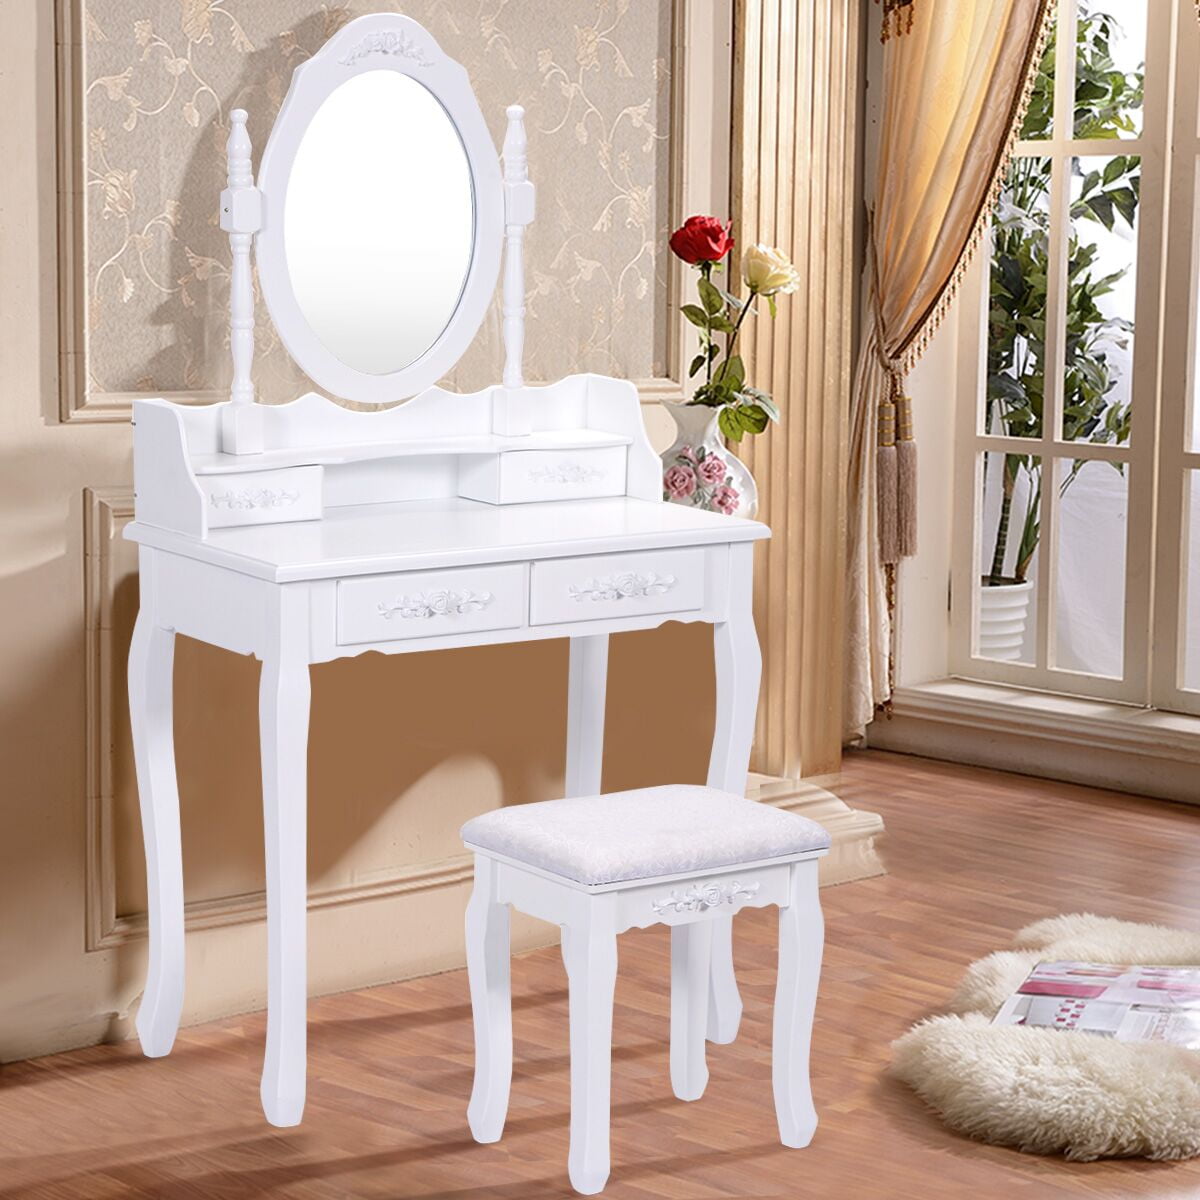 LIFE CARVER White Dressing Table Set with Mirror and Stool Girls Makeup Desk Bedroom 3 Drawers White 